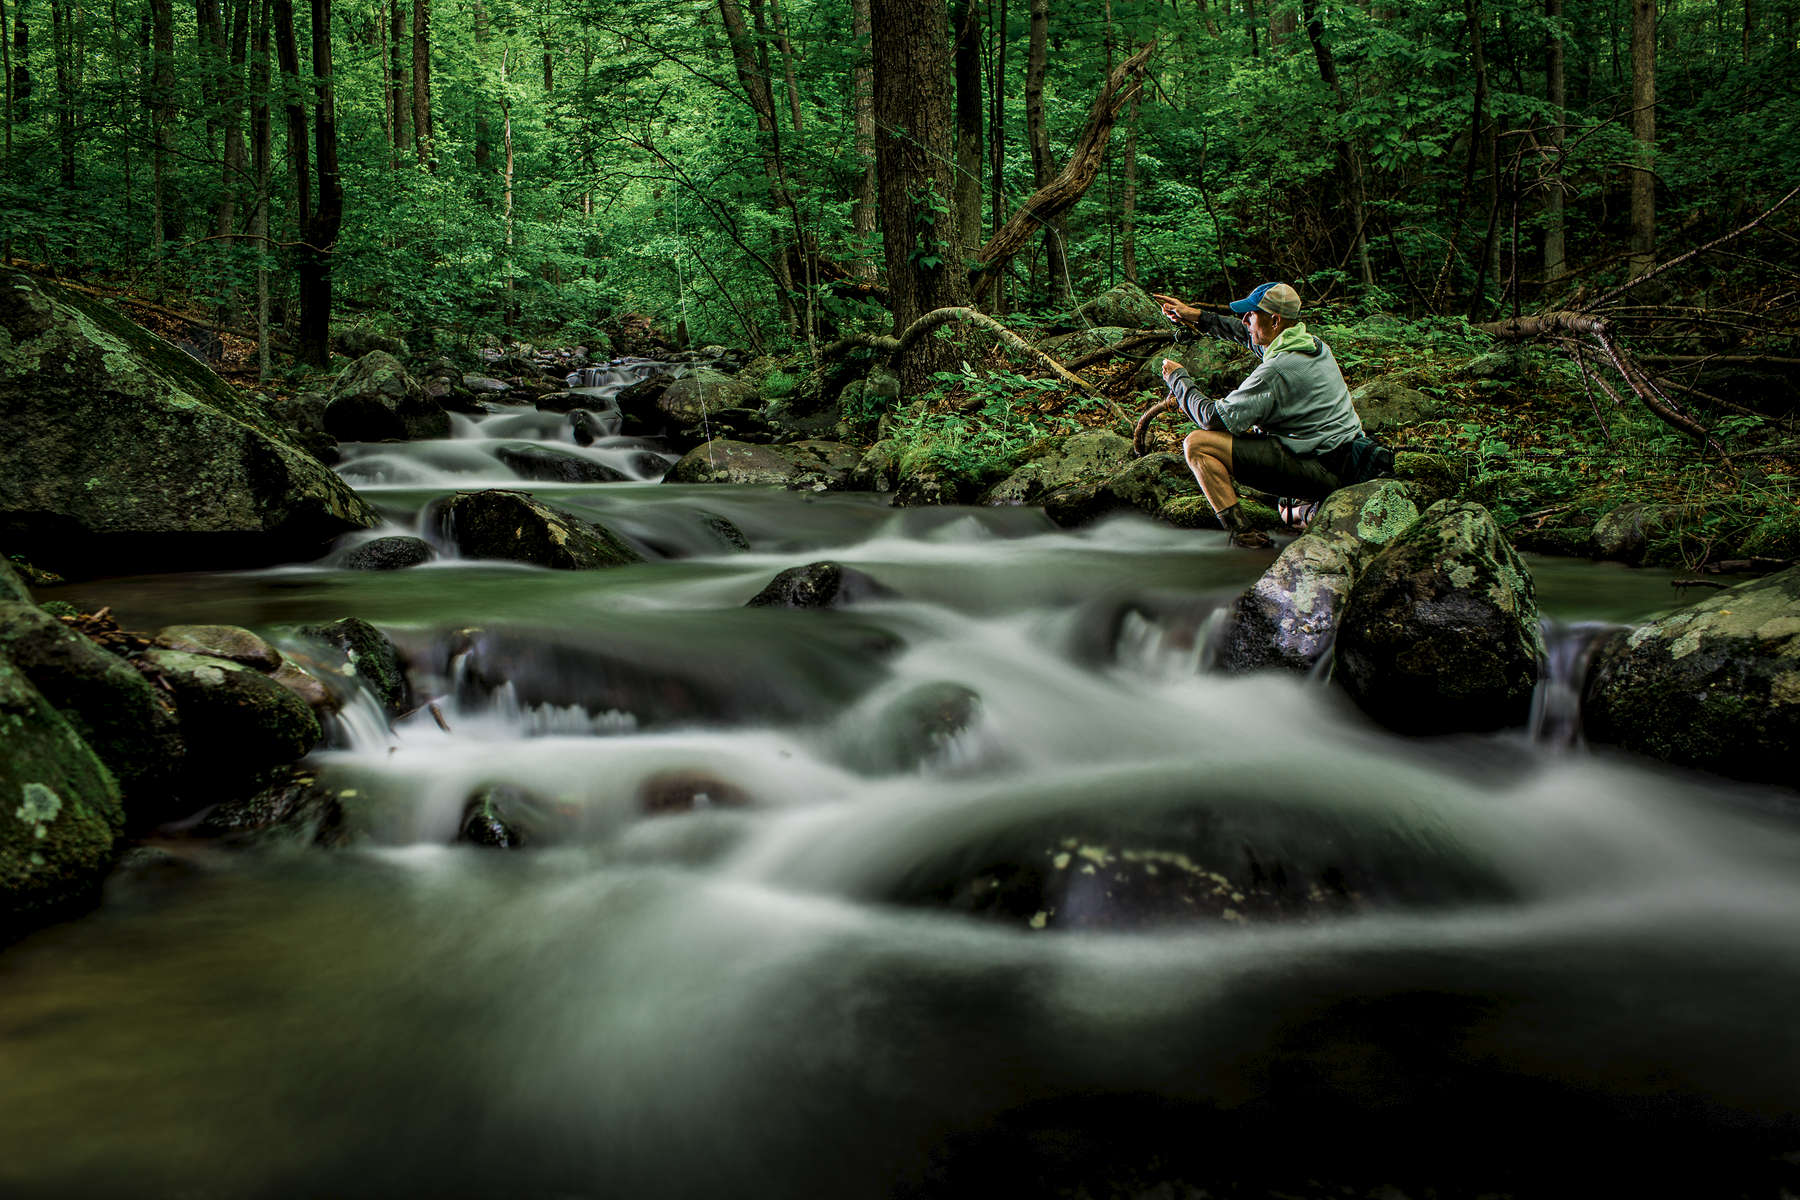 Fly fishing for Brook and rainbow trout in Blue Ridge Mountains of Virginia.